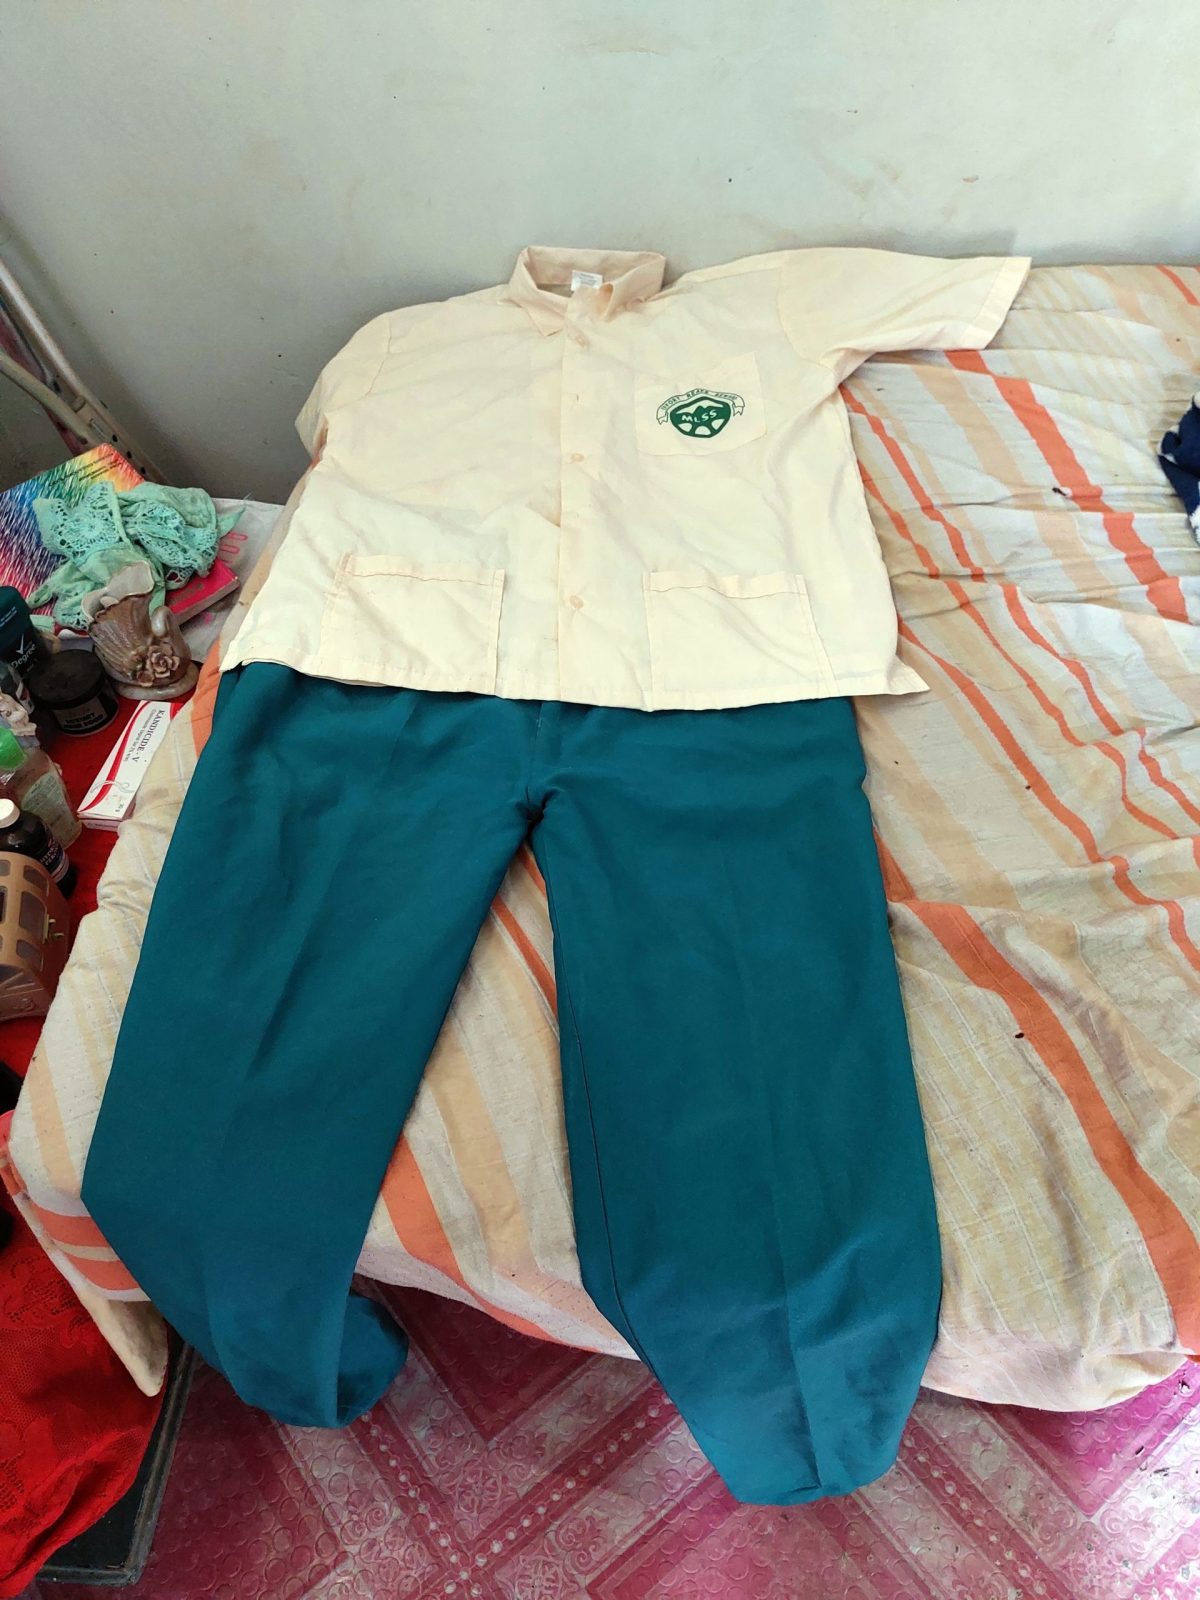 The Morvant Laventille Secondary School uniform which he was to have worn in January laid out Marlon Stewart’s bed.